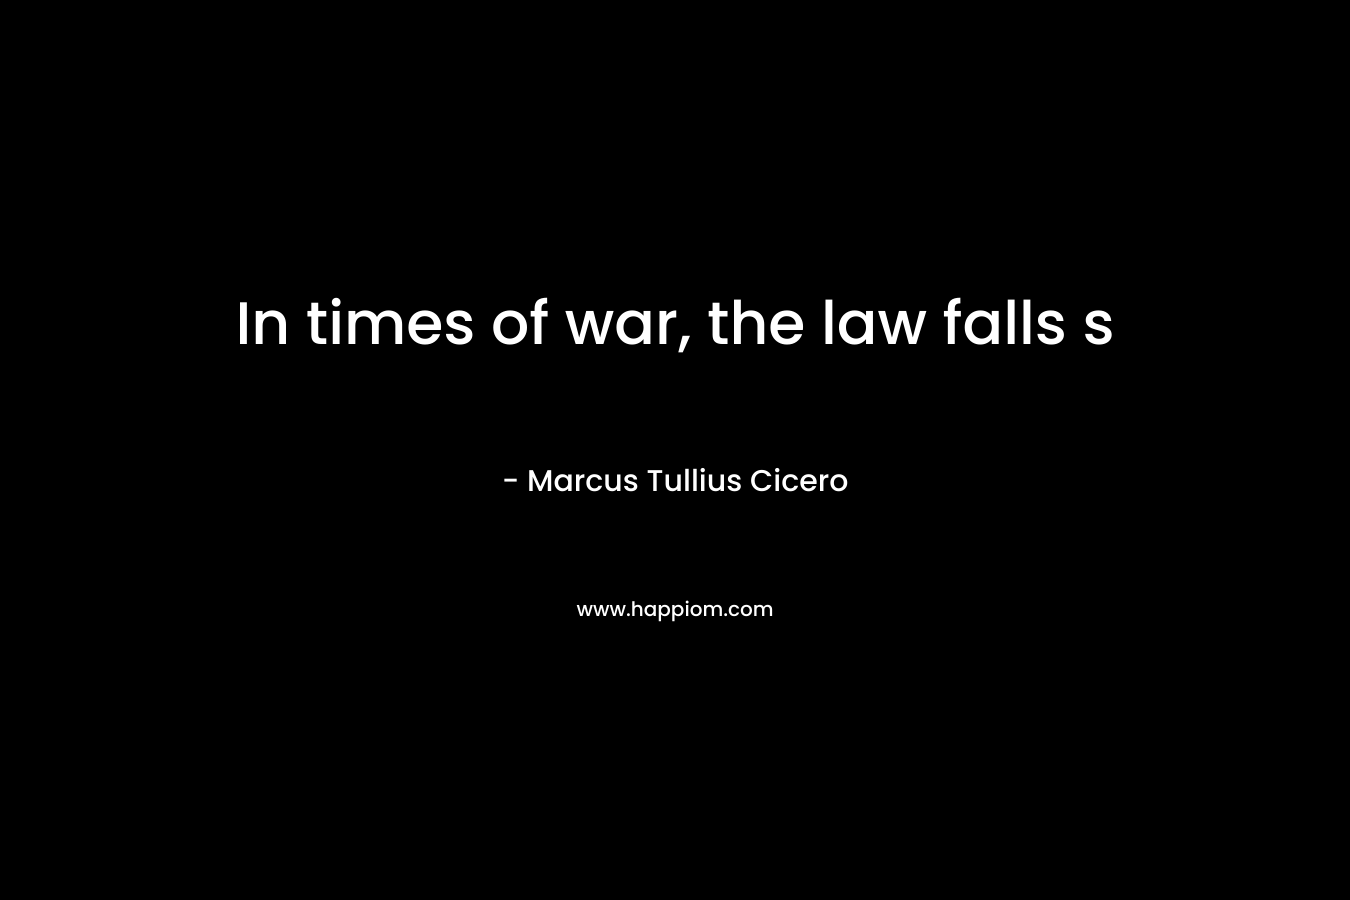 In times of war, the law falls s